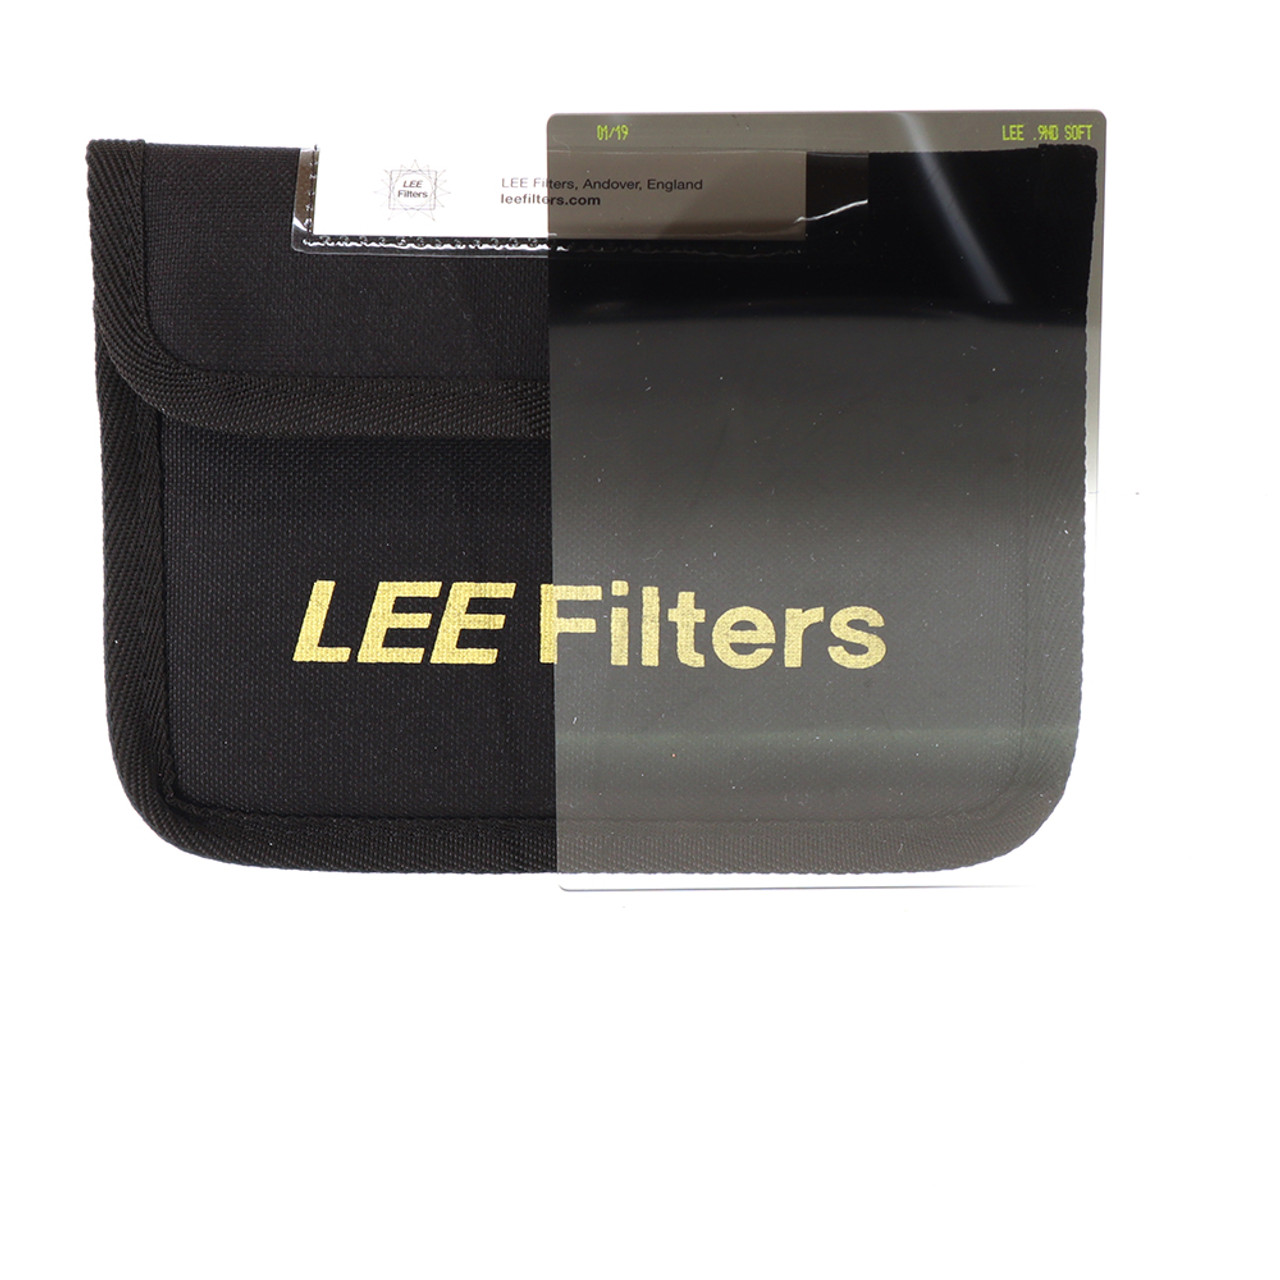 USED LEE FILTERS 100 0.9ND SOFT GRAD (748151)